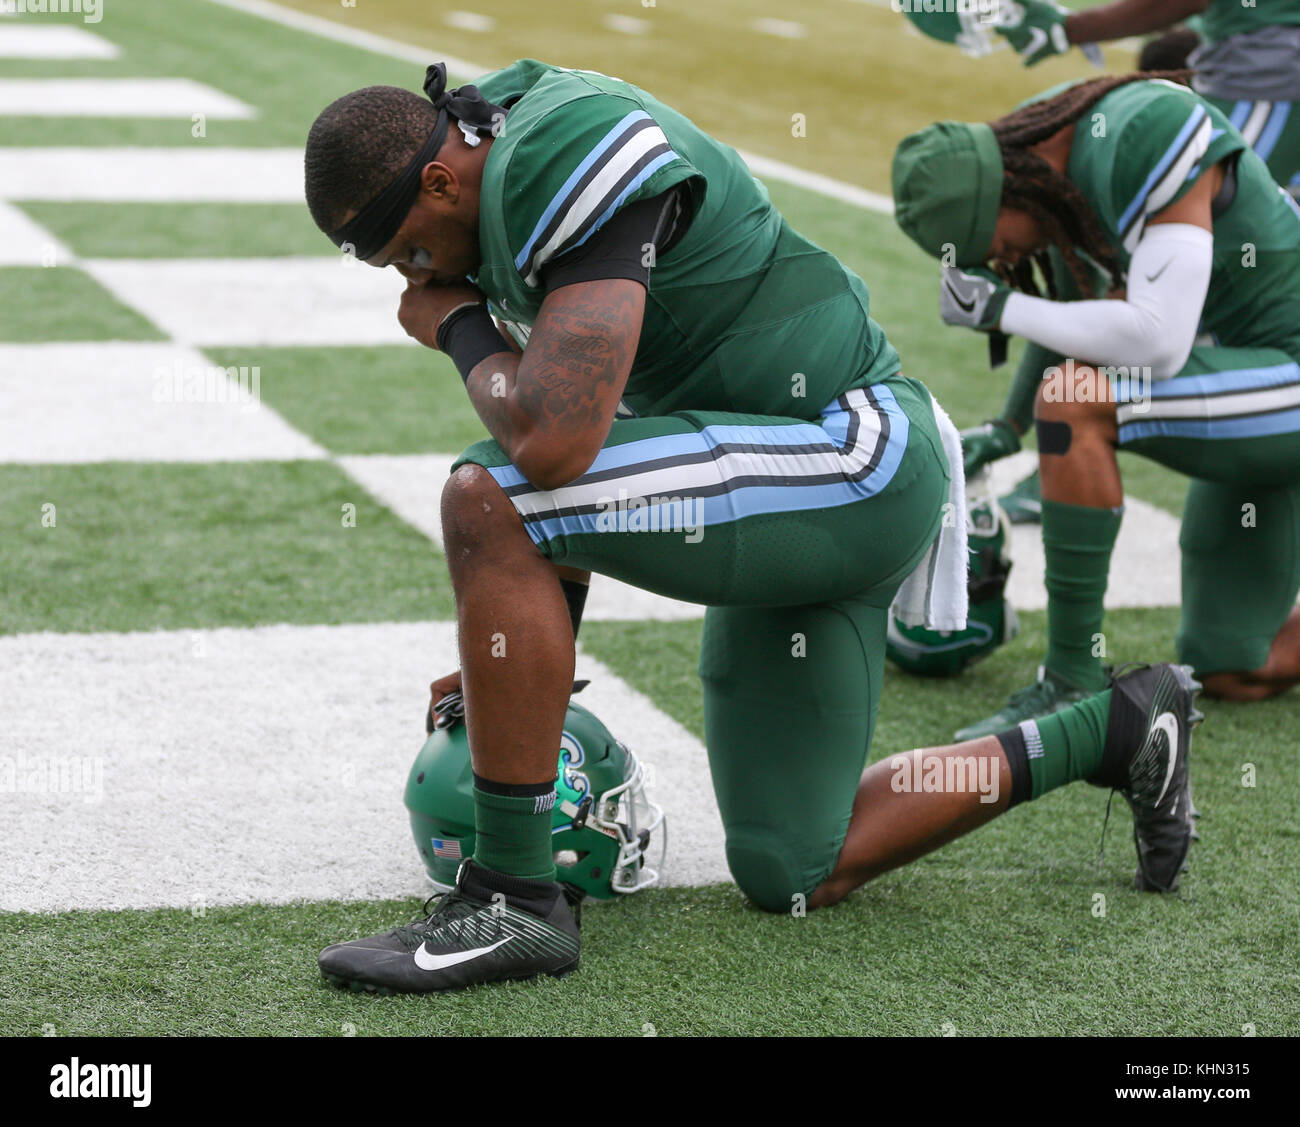 New Orleans, LA, USA. 18th Nov, 2017. Tulane QB Jonathan Bank #1 preys in the end zone prior to the NCAA football game between the Tulane Green Wave and the Houston Cougars at Yulman Stadium in New Orleans, LA. Kyle Okita/CSM/Alamy Live News Stock Photo